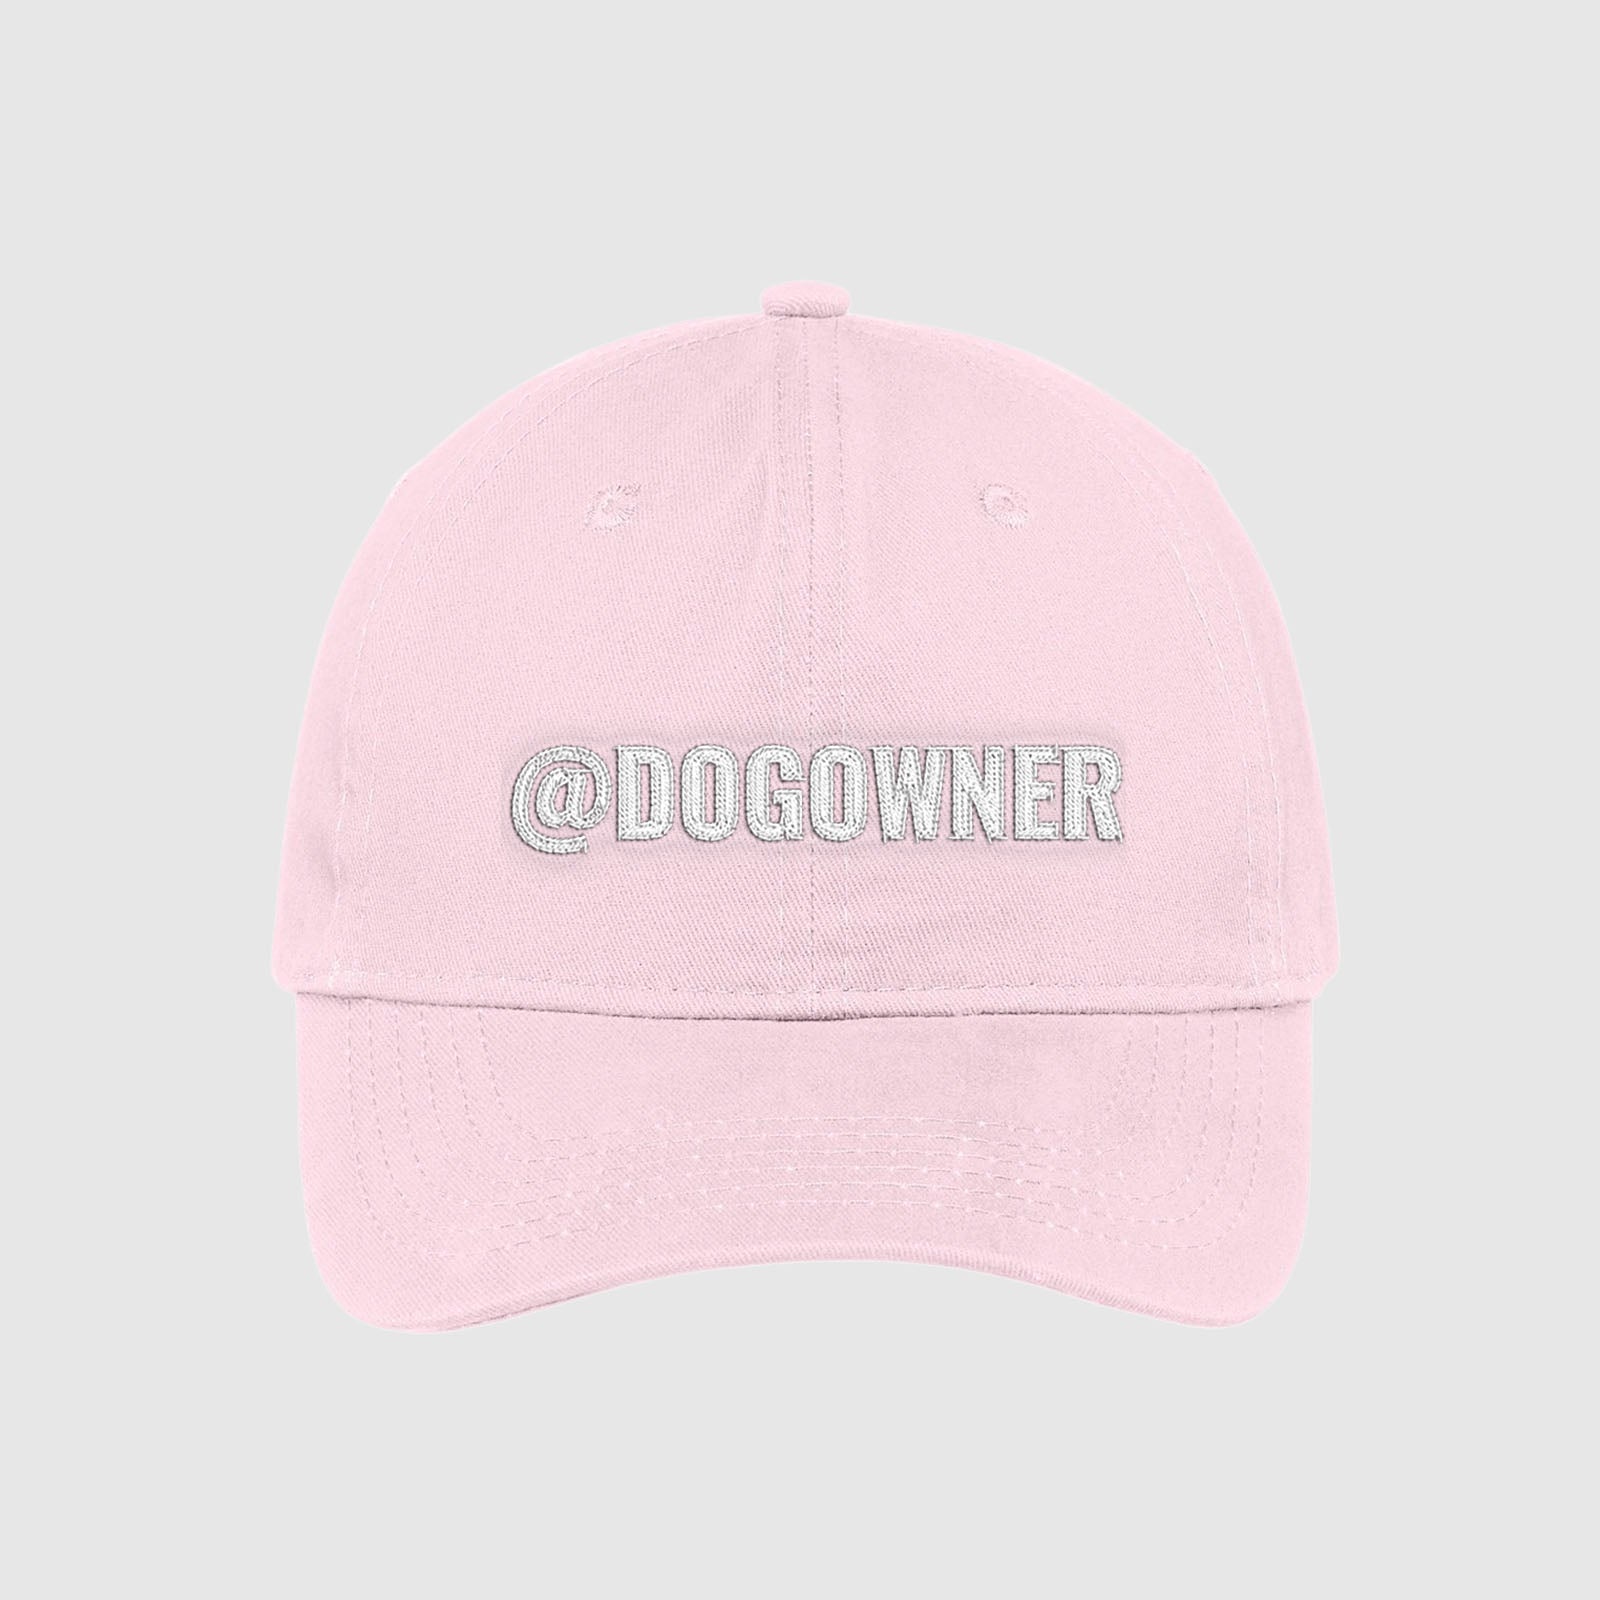 Blush light pink customizable hat with your social media handle embroidered on the front.